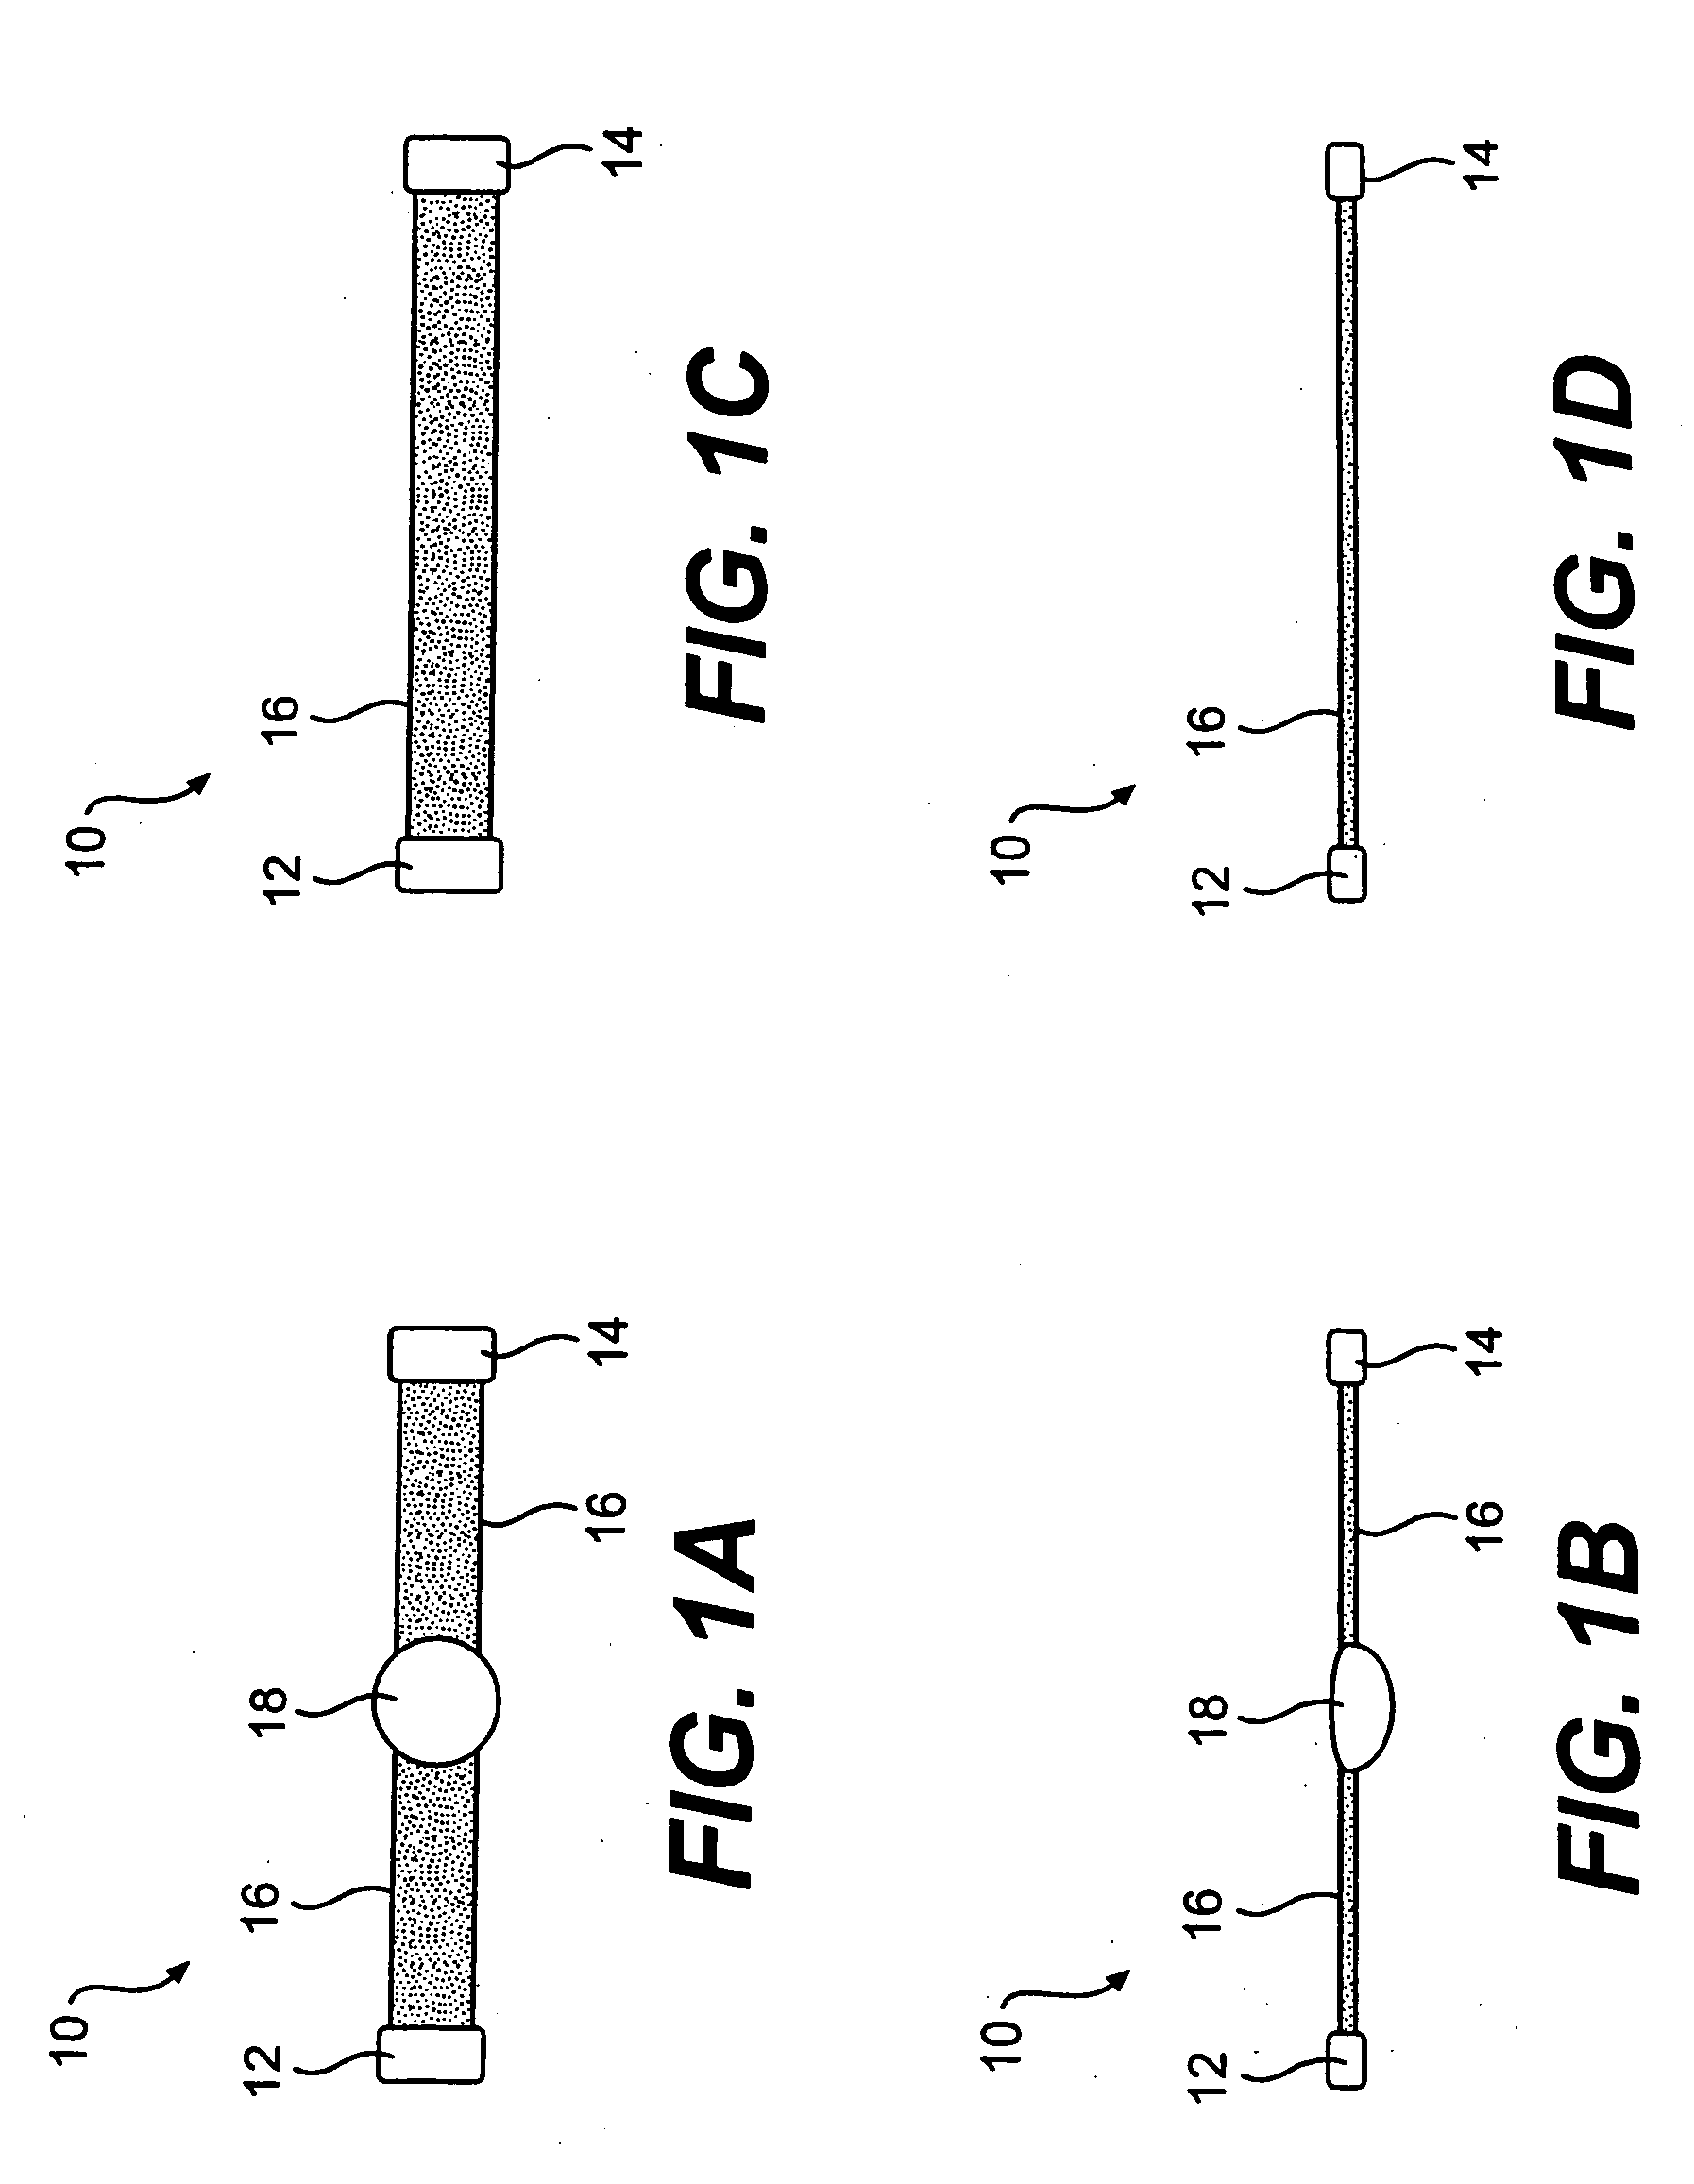 Devices and methods for heart valve treatment